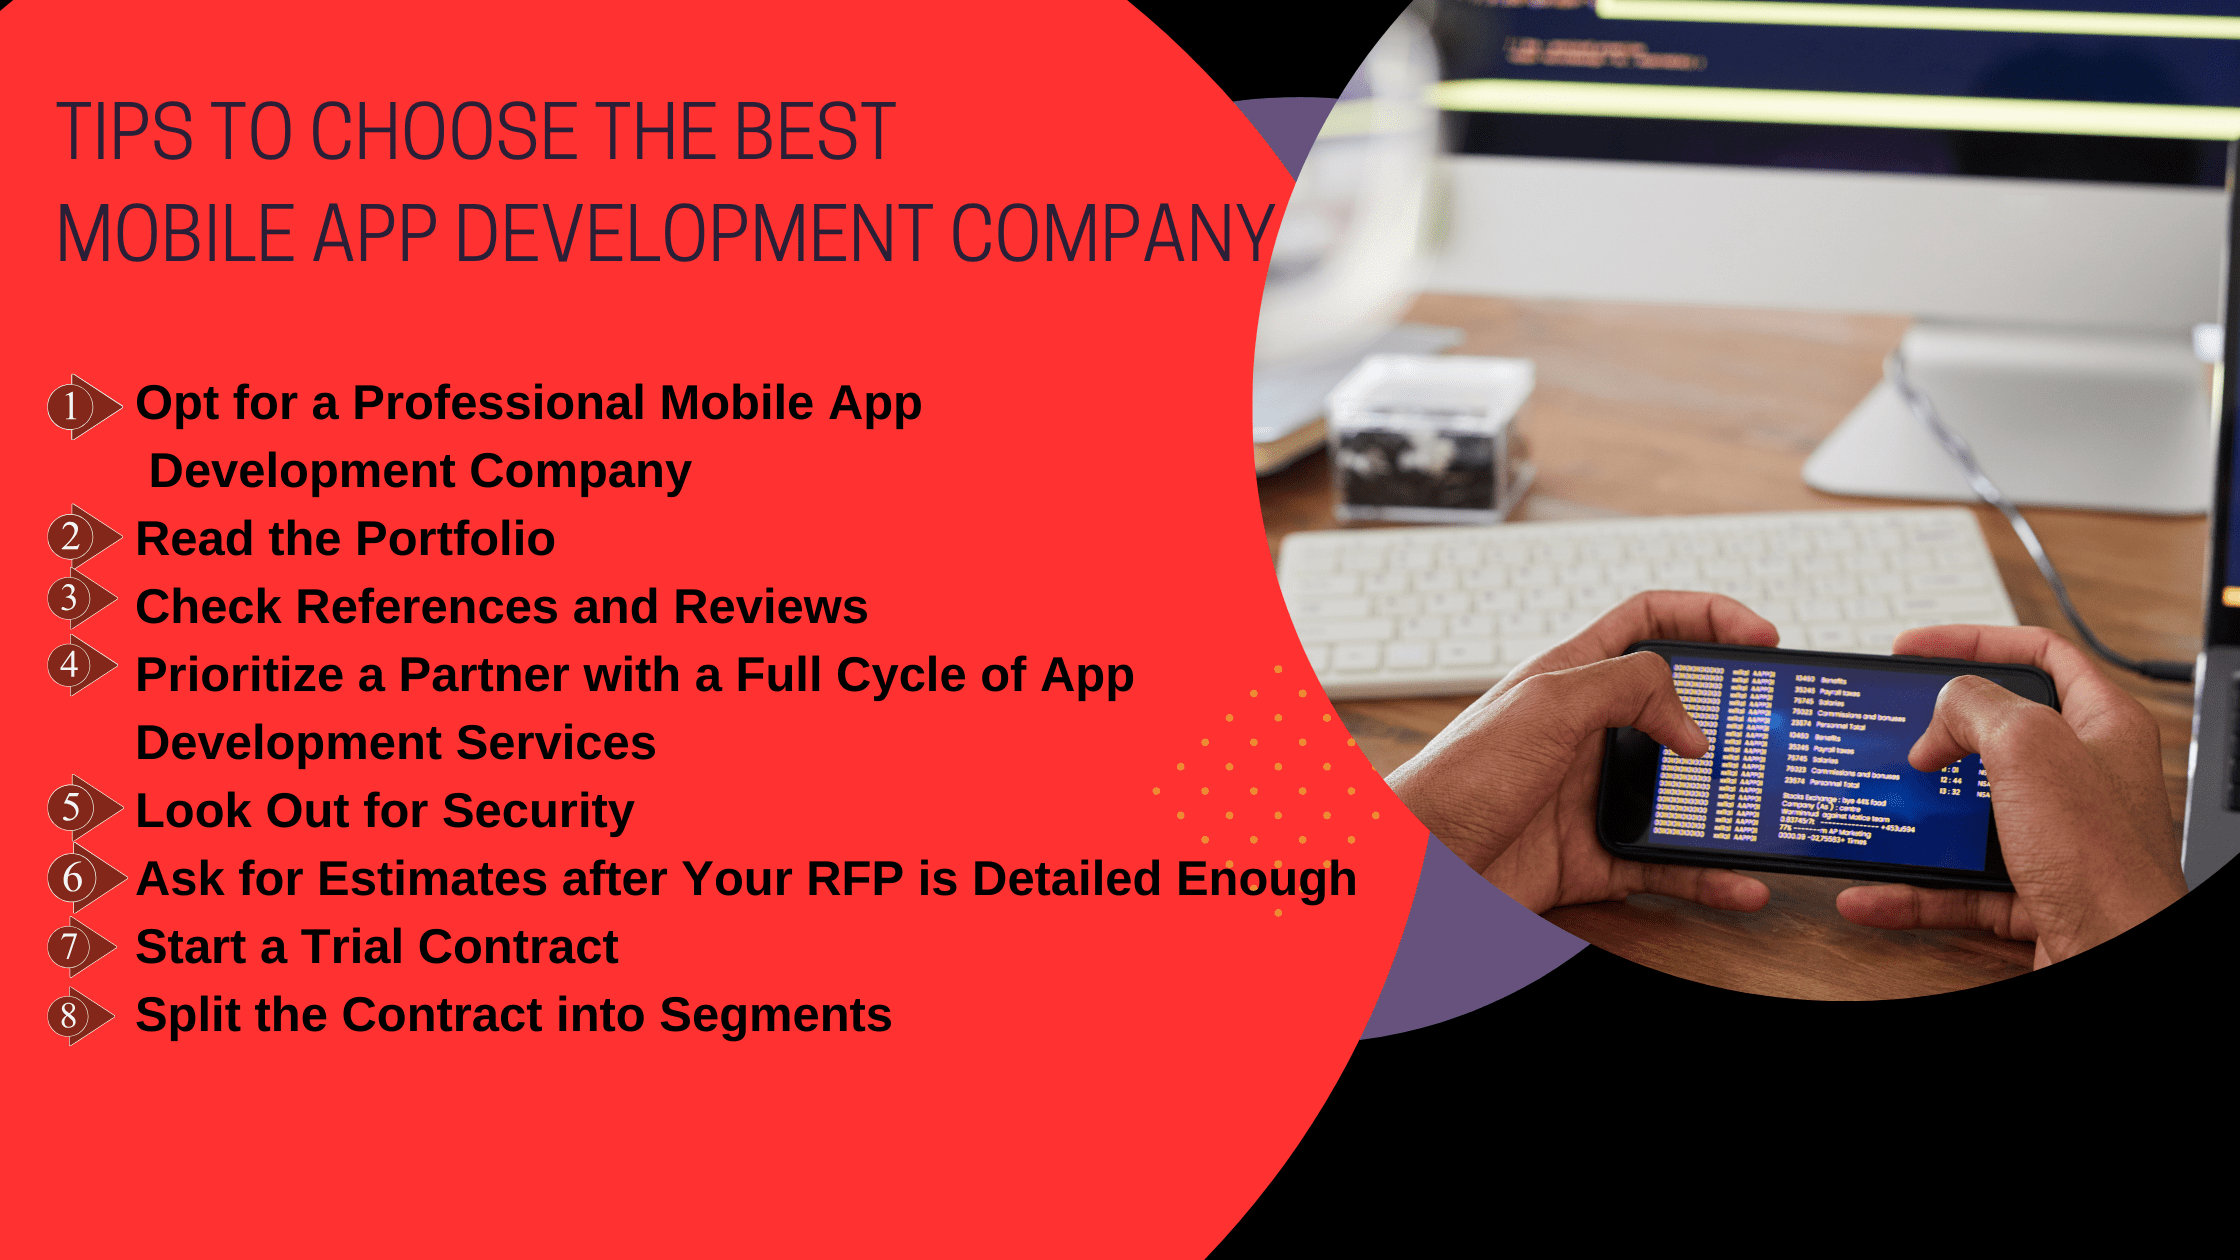 Tips to Choose the Best Mobile App Development Company